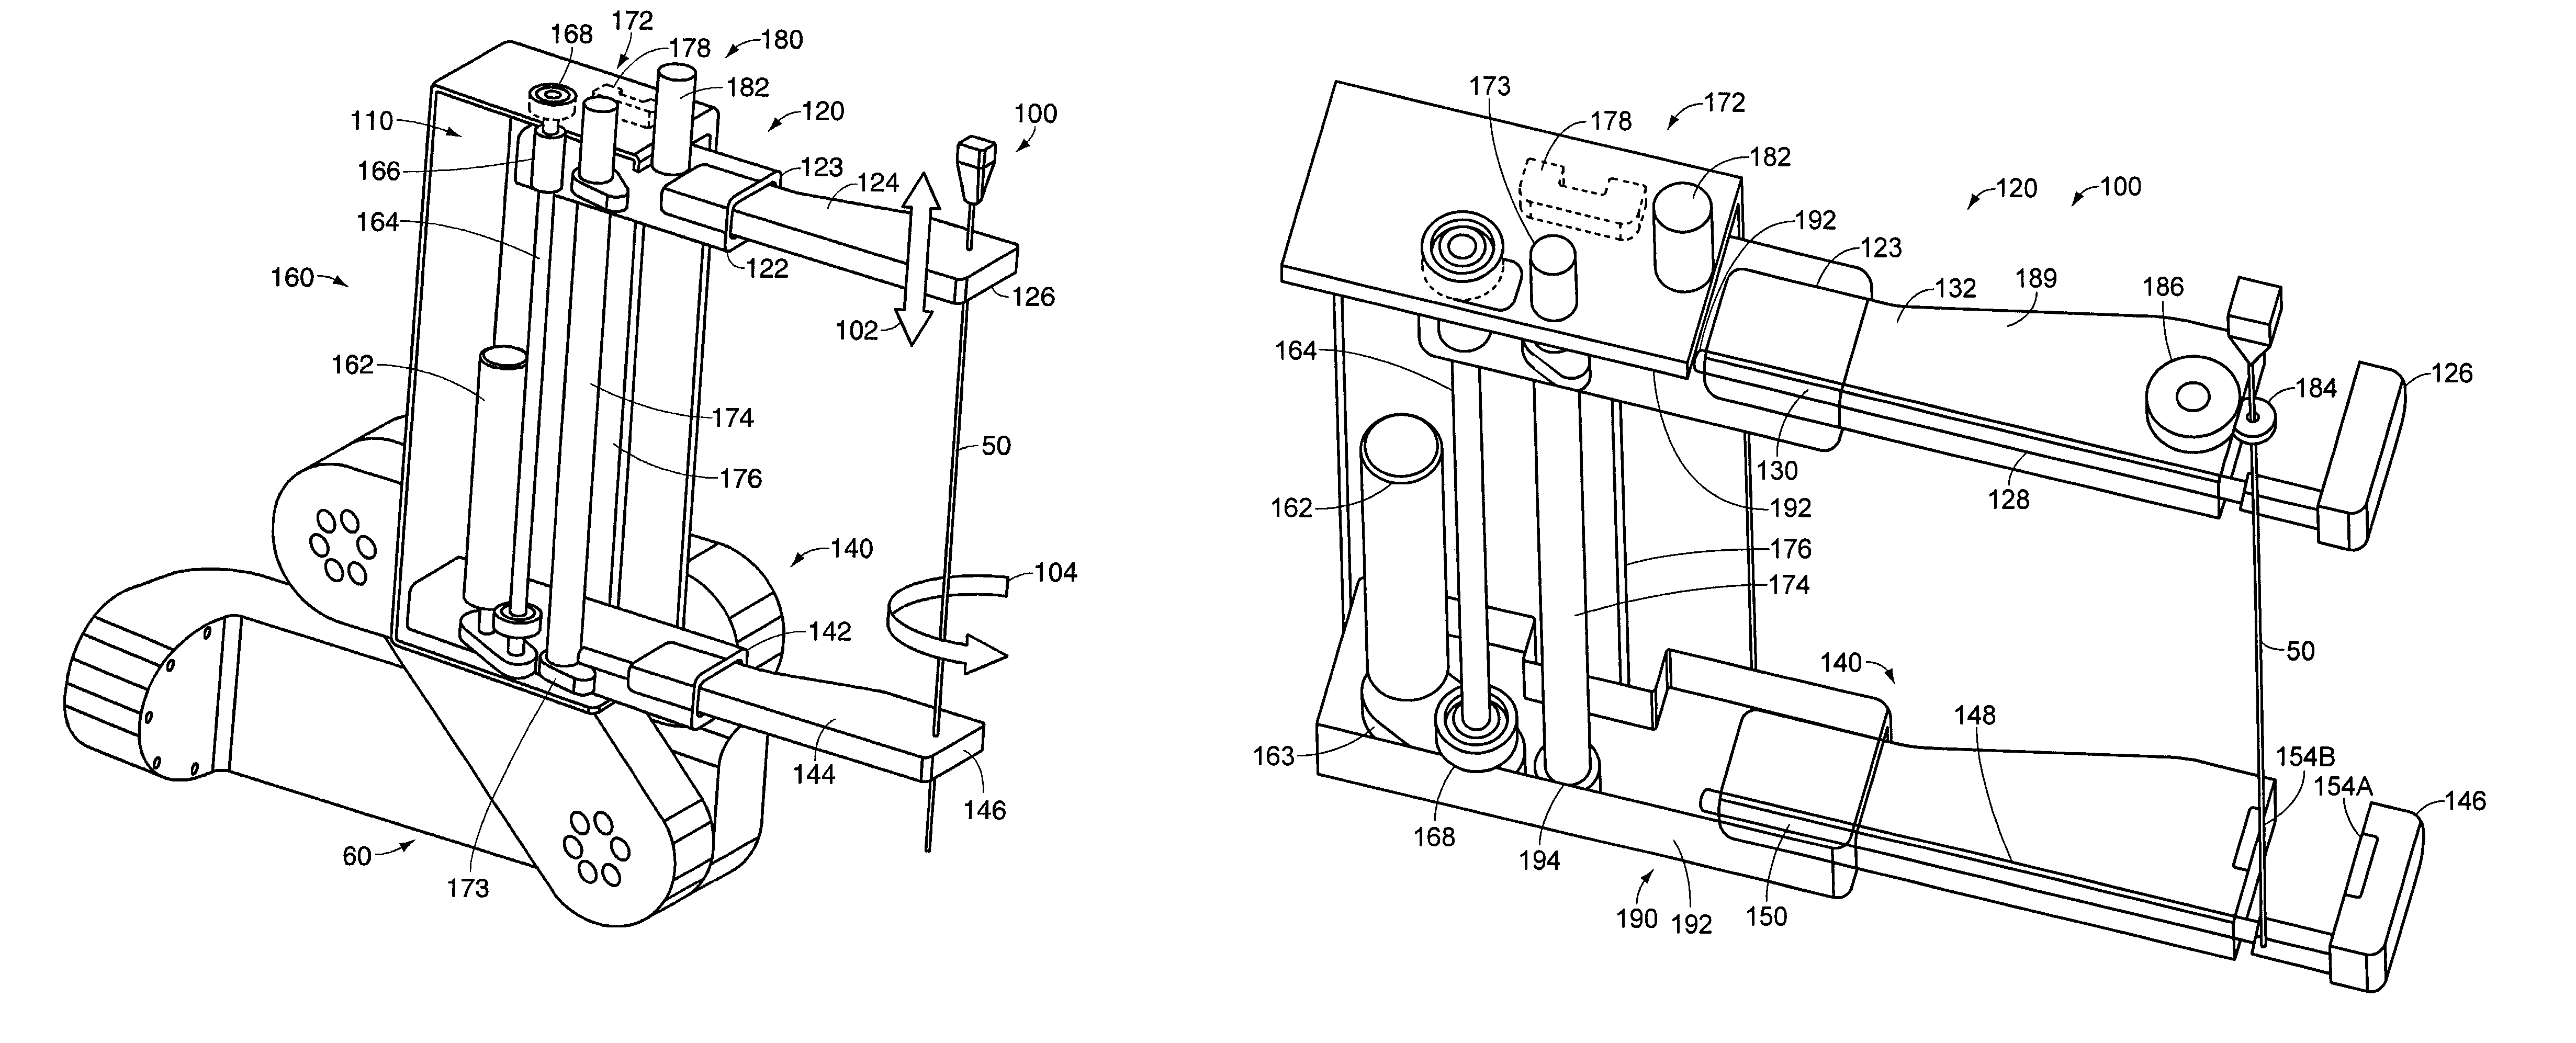 Controllable motorized device for percutaneous needle placement in soft tissue target and methods and systems related thereto